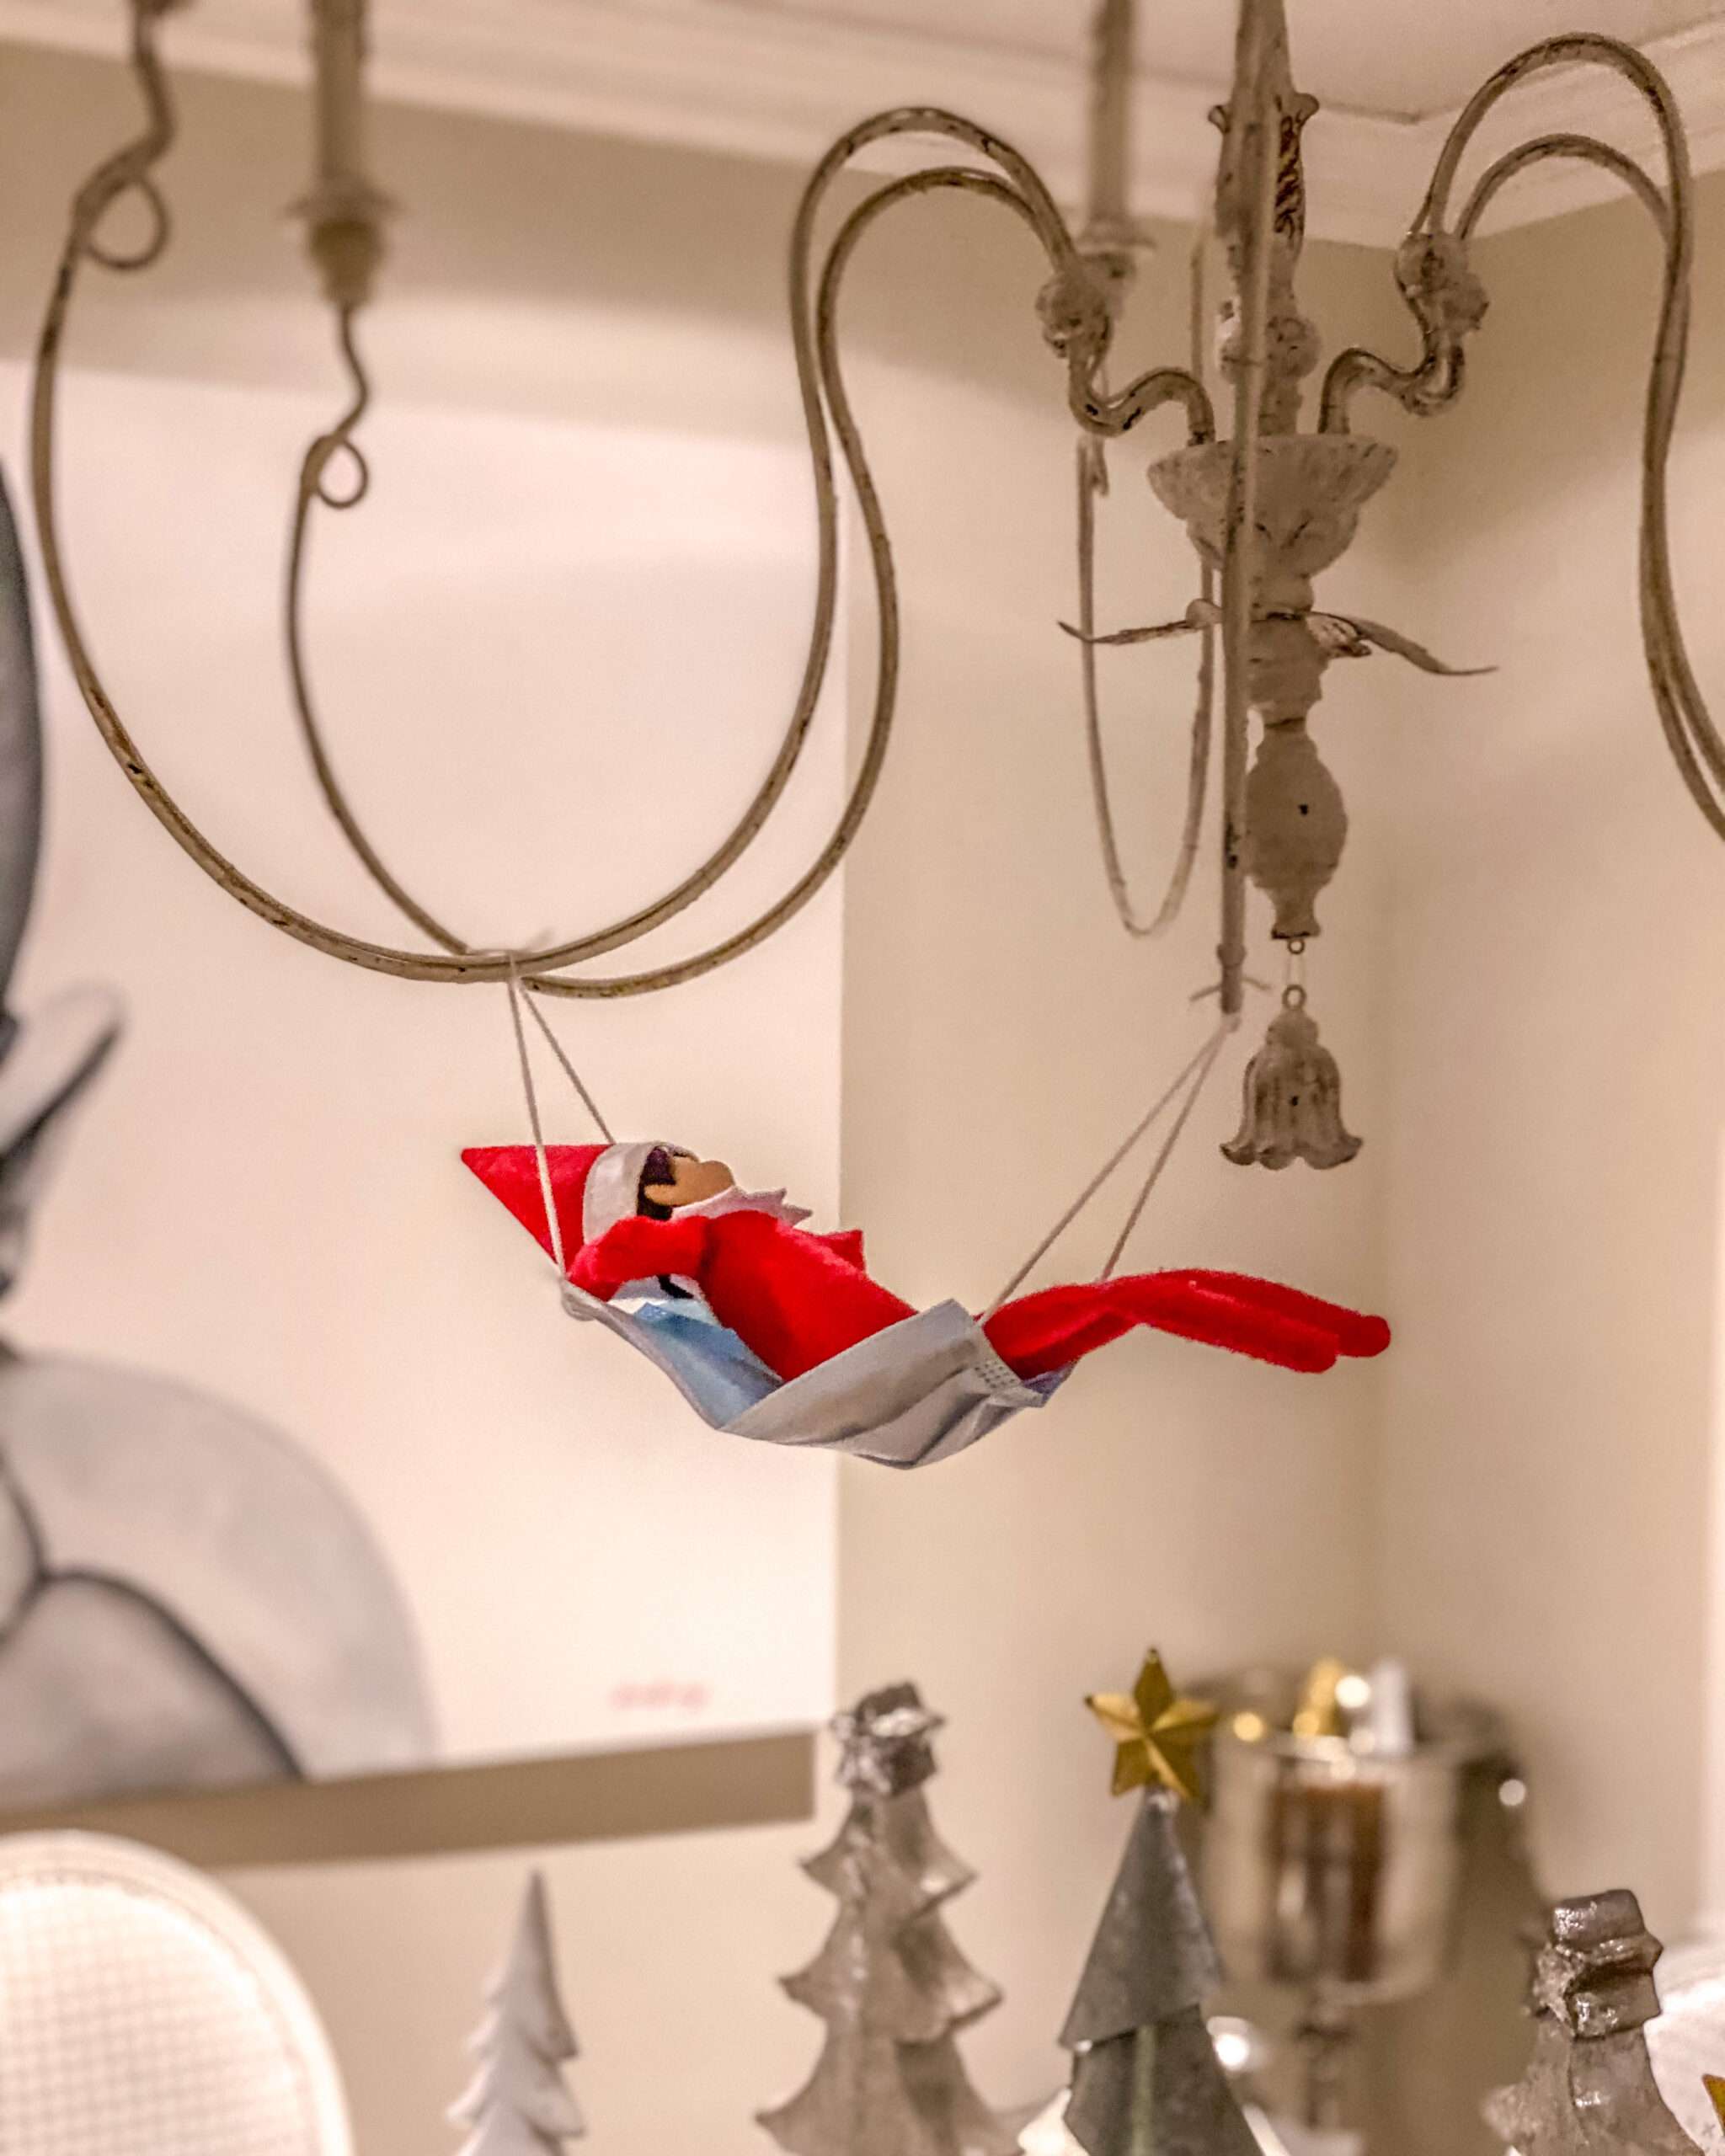 Disposable face mask hanging on a chandelier as a elf hammock. Fun & easy Elf on the Shelf ideas for your toddler or little kid. Quick to setup and lots of naughty and nice ideas, perfect to bring some Christmas magic to your home. #ElfOnTheShelf #ElfIdeas #ElfOnTheShelfIdeas #Christmas #ChristmasMagic